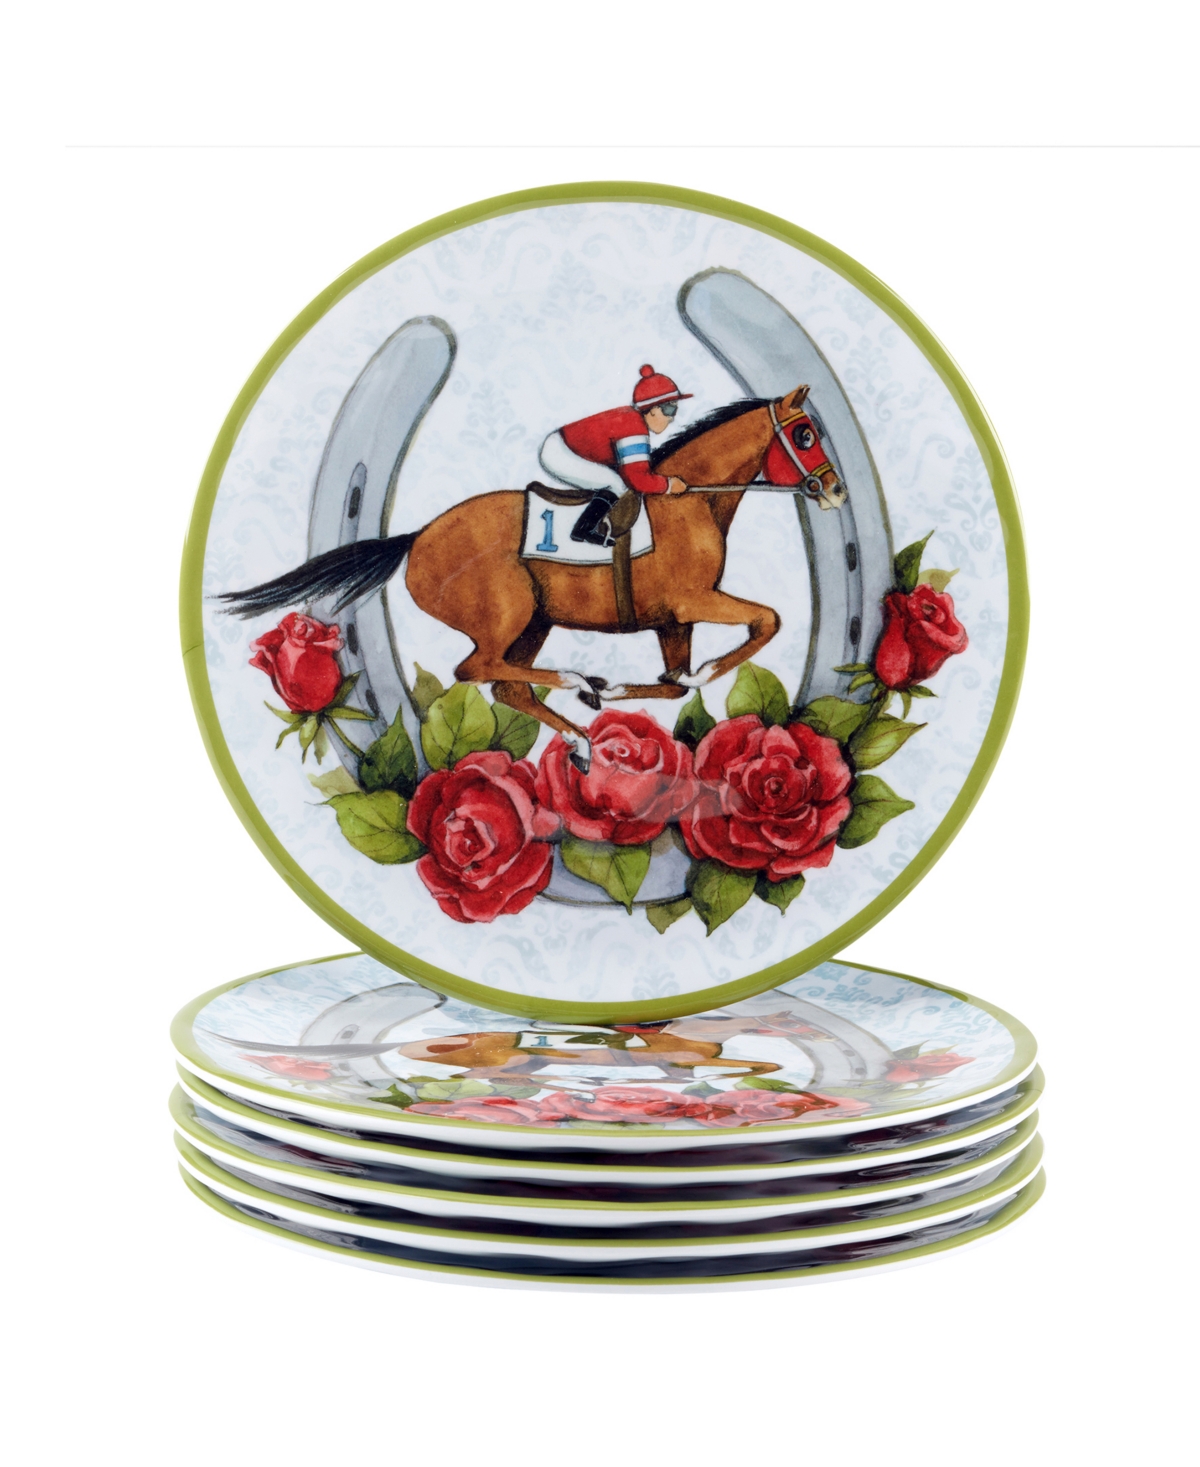 Derby Day At The Races Set of 6 Melamine Salad Plates, Service For 6 - Miscellaneous